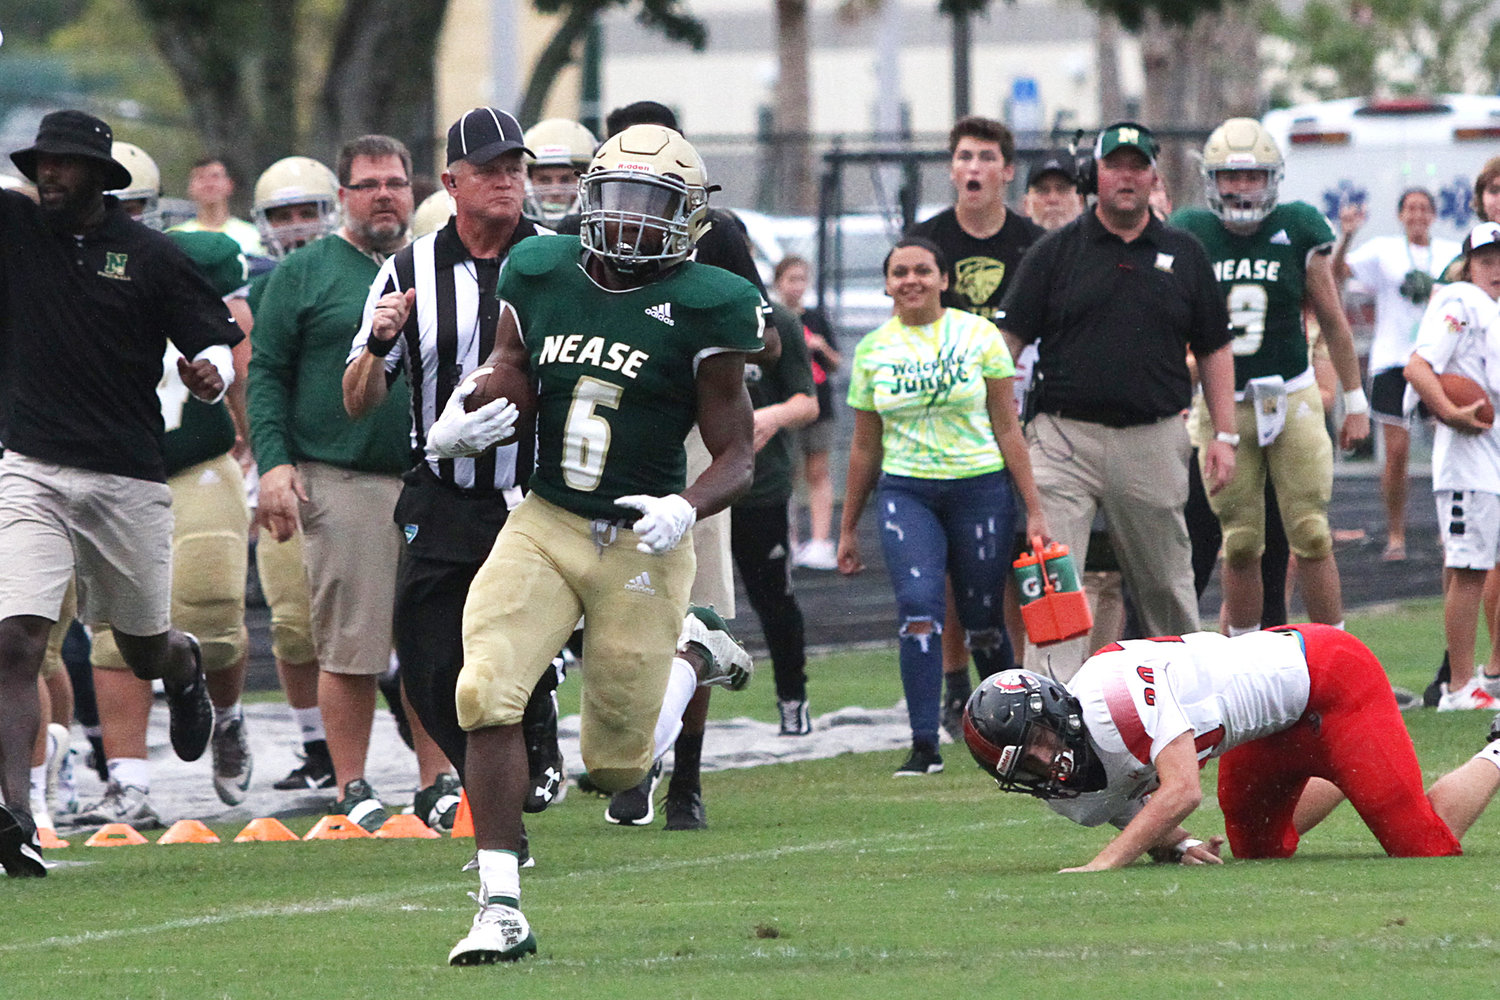 Nease running back Joe Bradshaw (6) takes off for a long touchdown run against Creekside on Aug. 30, 2019.